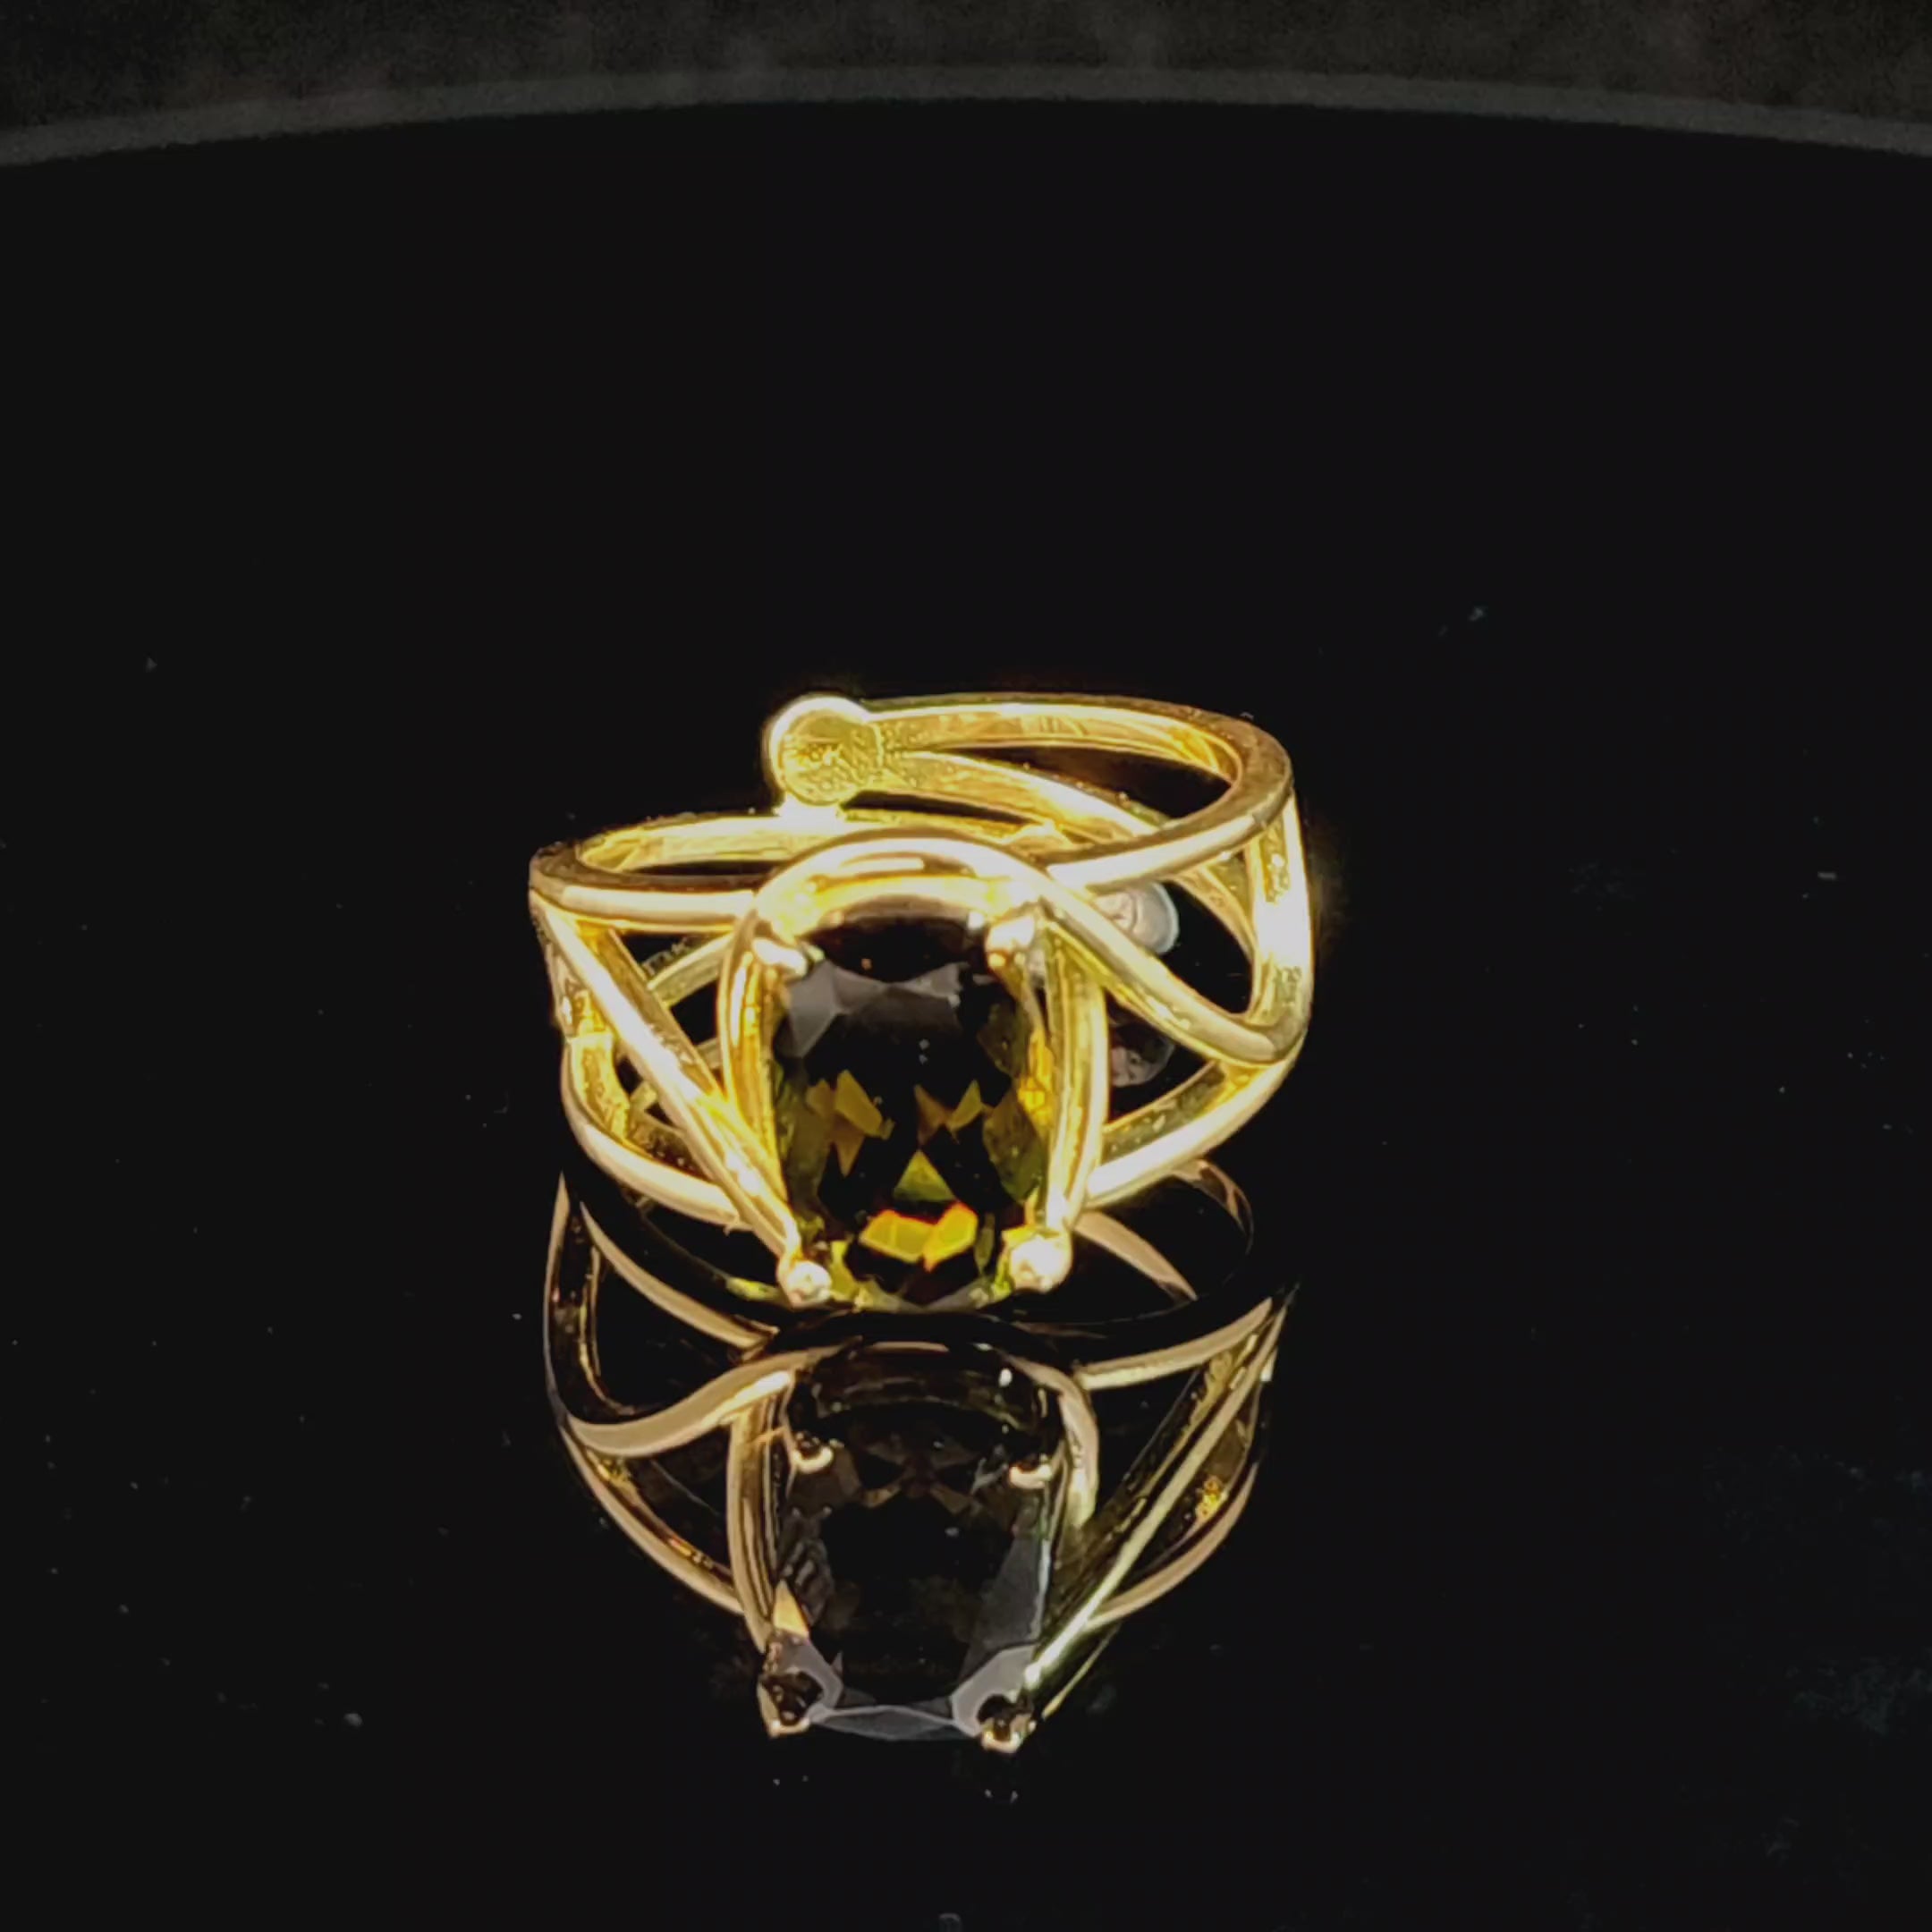 Color Shift Green Tourmaline Adjustable Finger Cuff Ring 18K Solid Gold for Heart Healing and Positive Energy